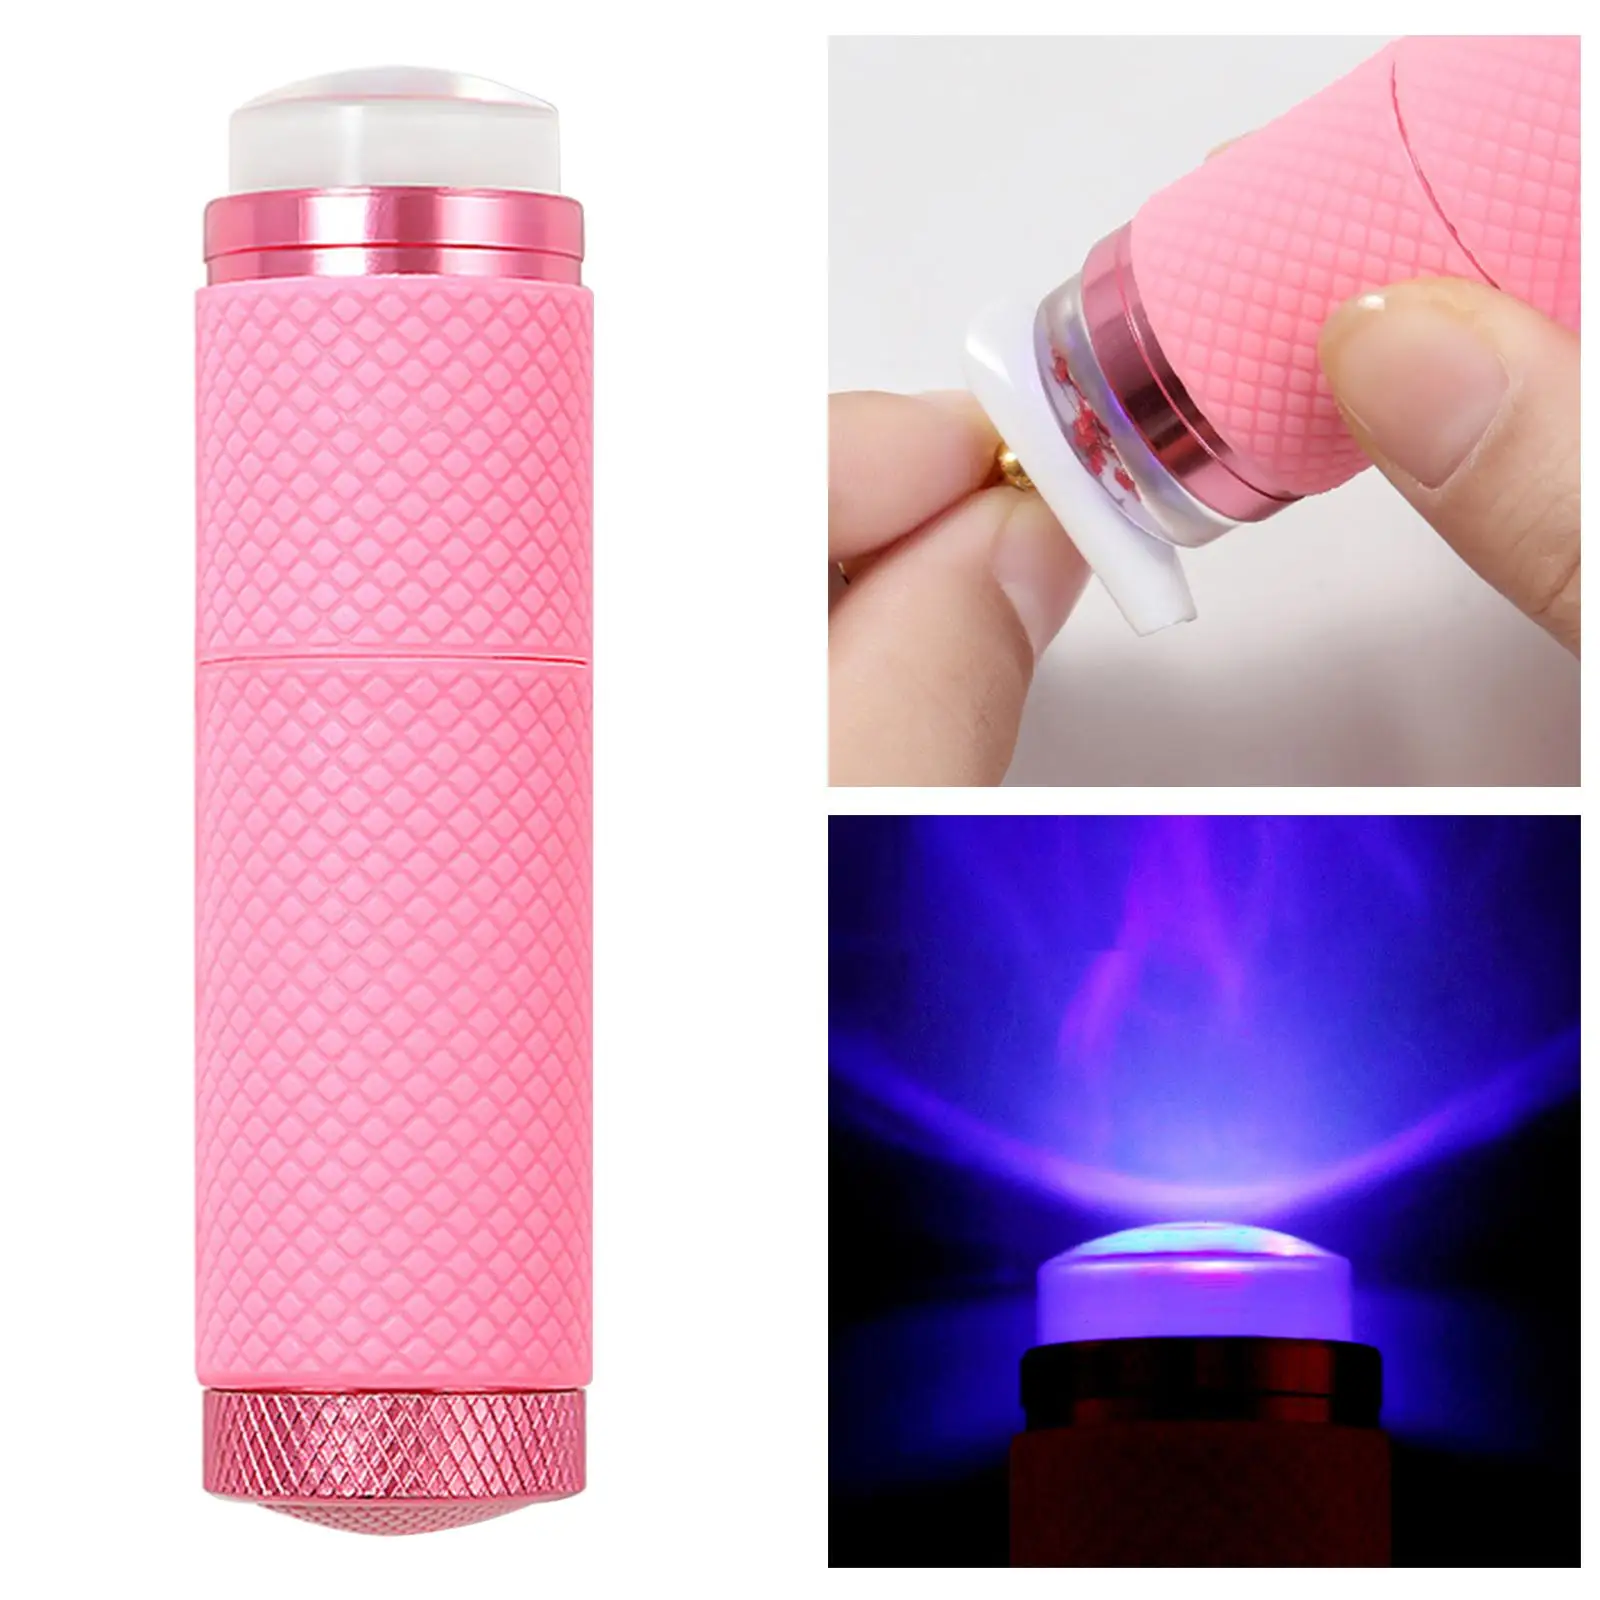 UV Light Presser Double Head Portable Nail Polish Drying Lamp for Gel and Regular Polish Manicure Decor Quick Nail Touch-Ups